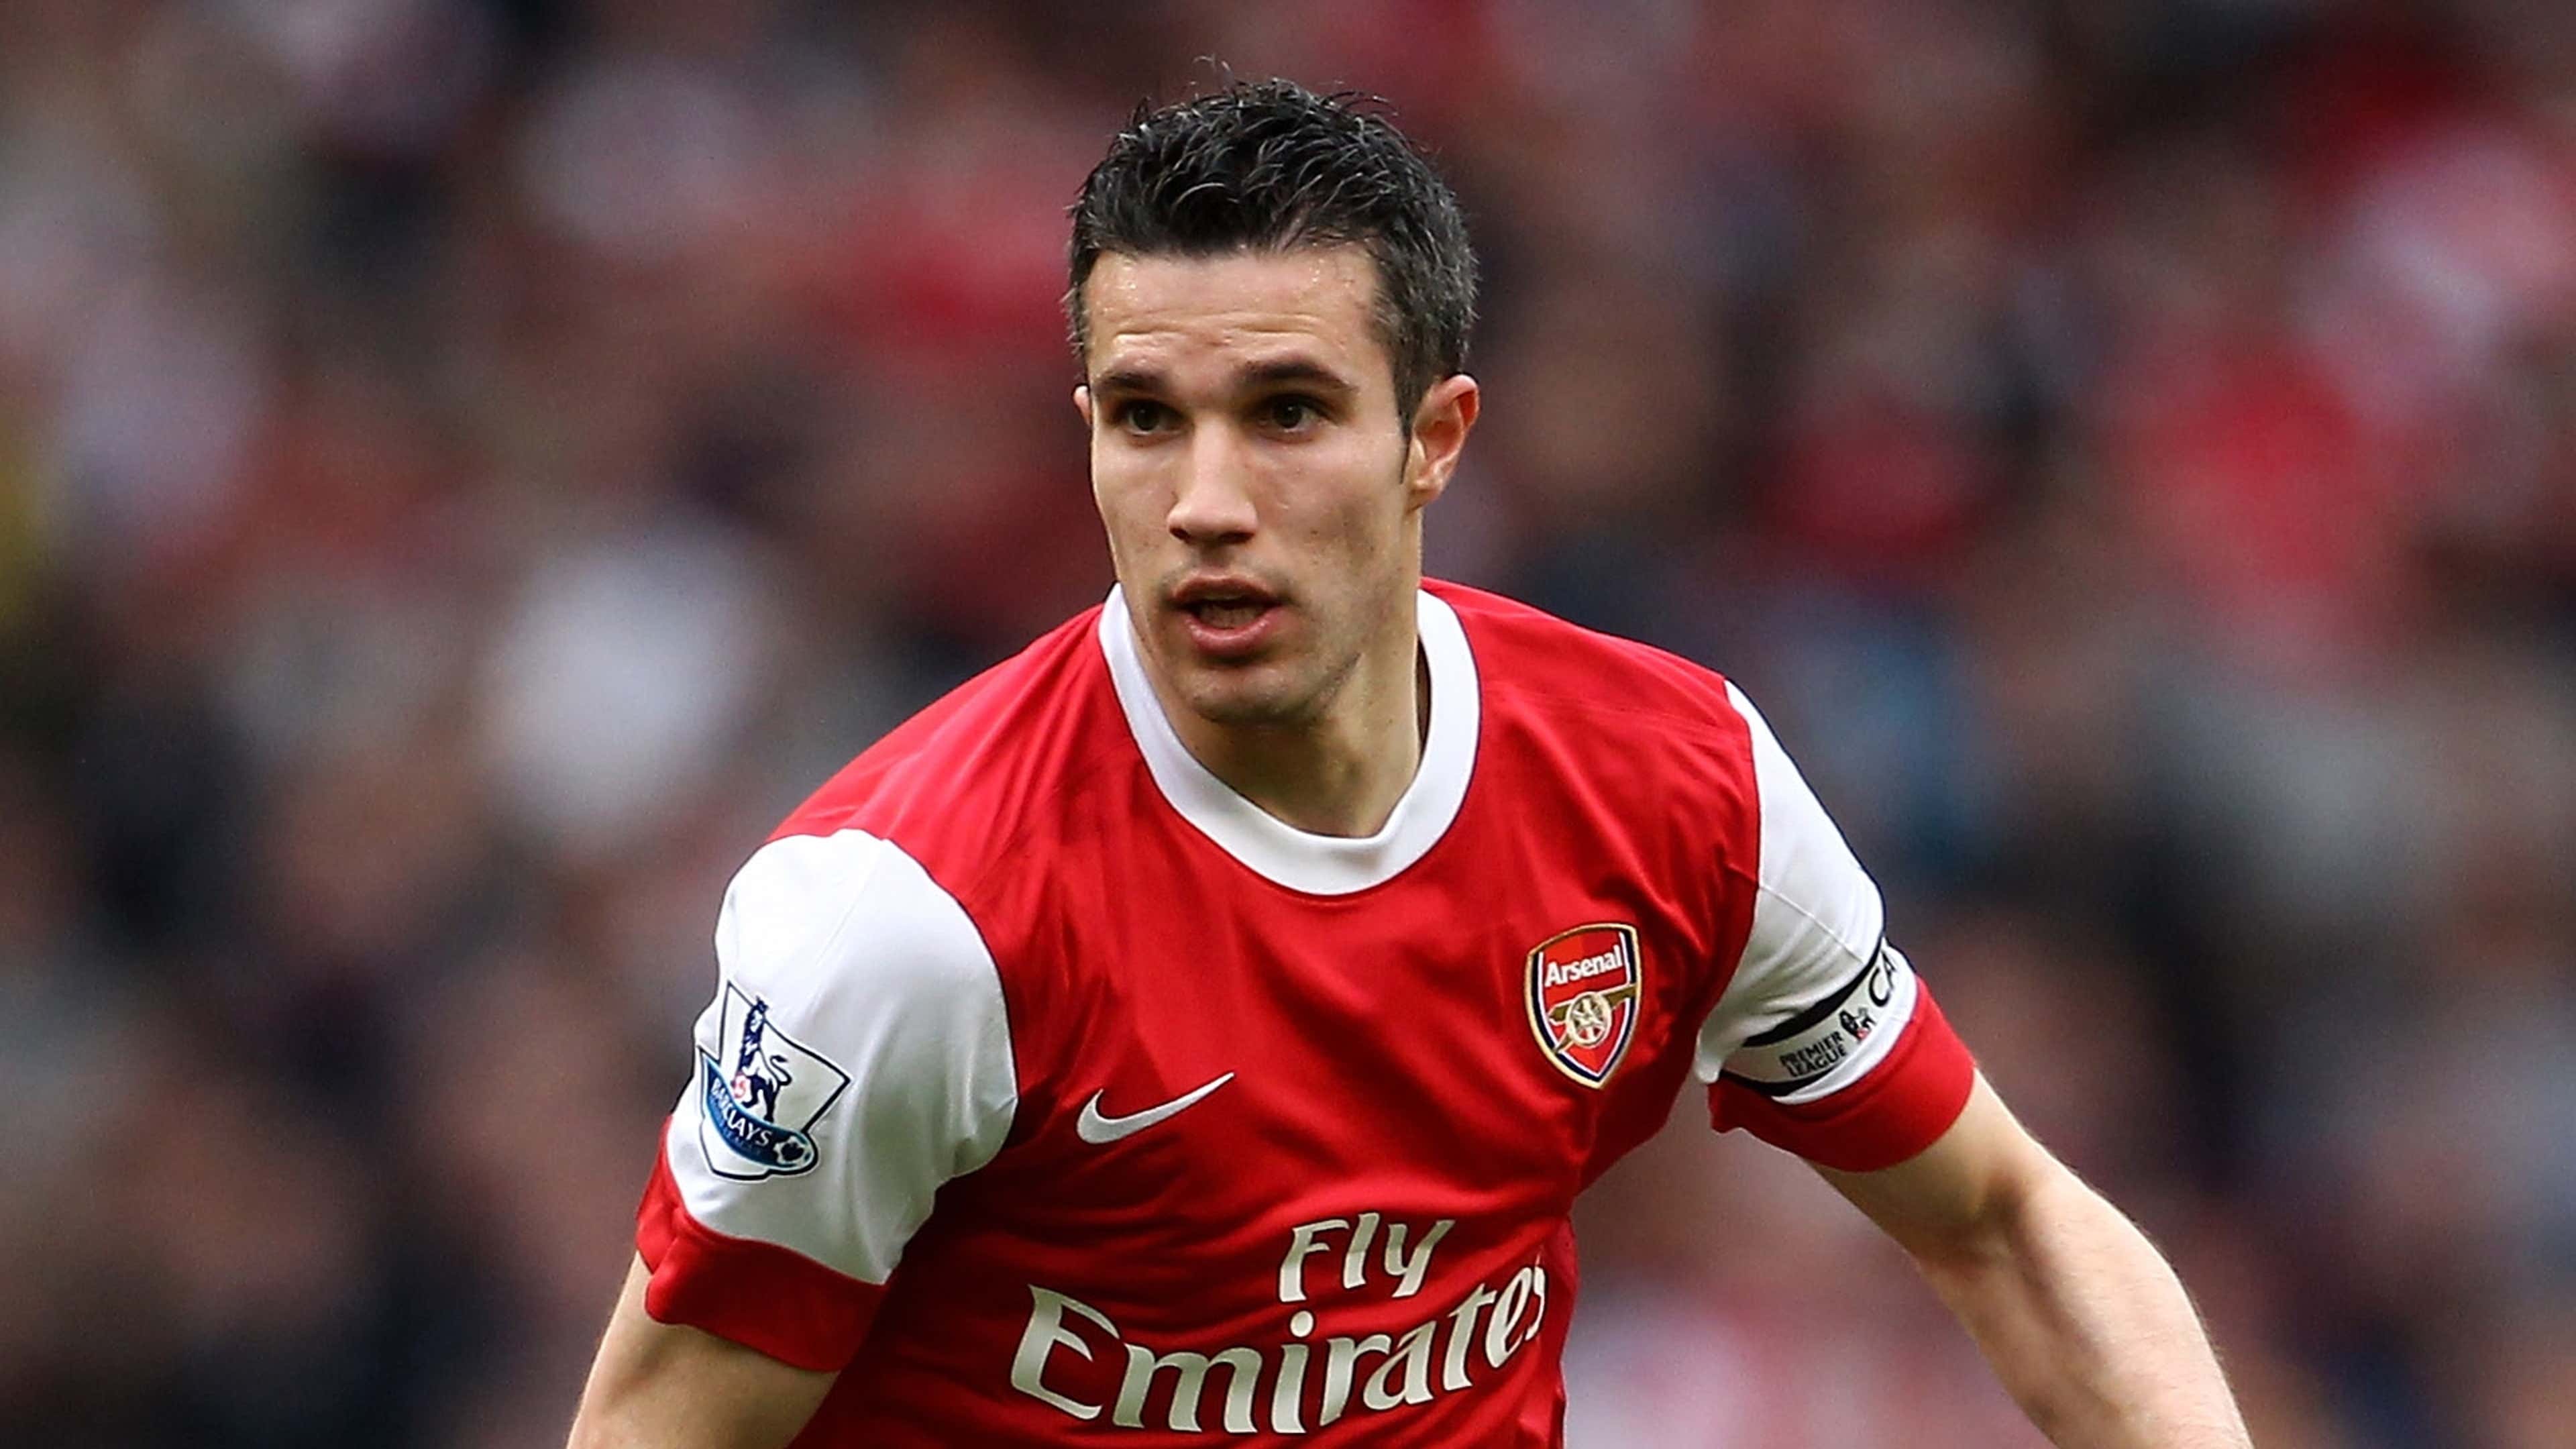 Robin van Persie is the closest player to Thierry Henry at Arsenal.